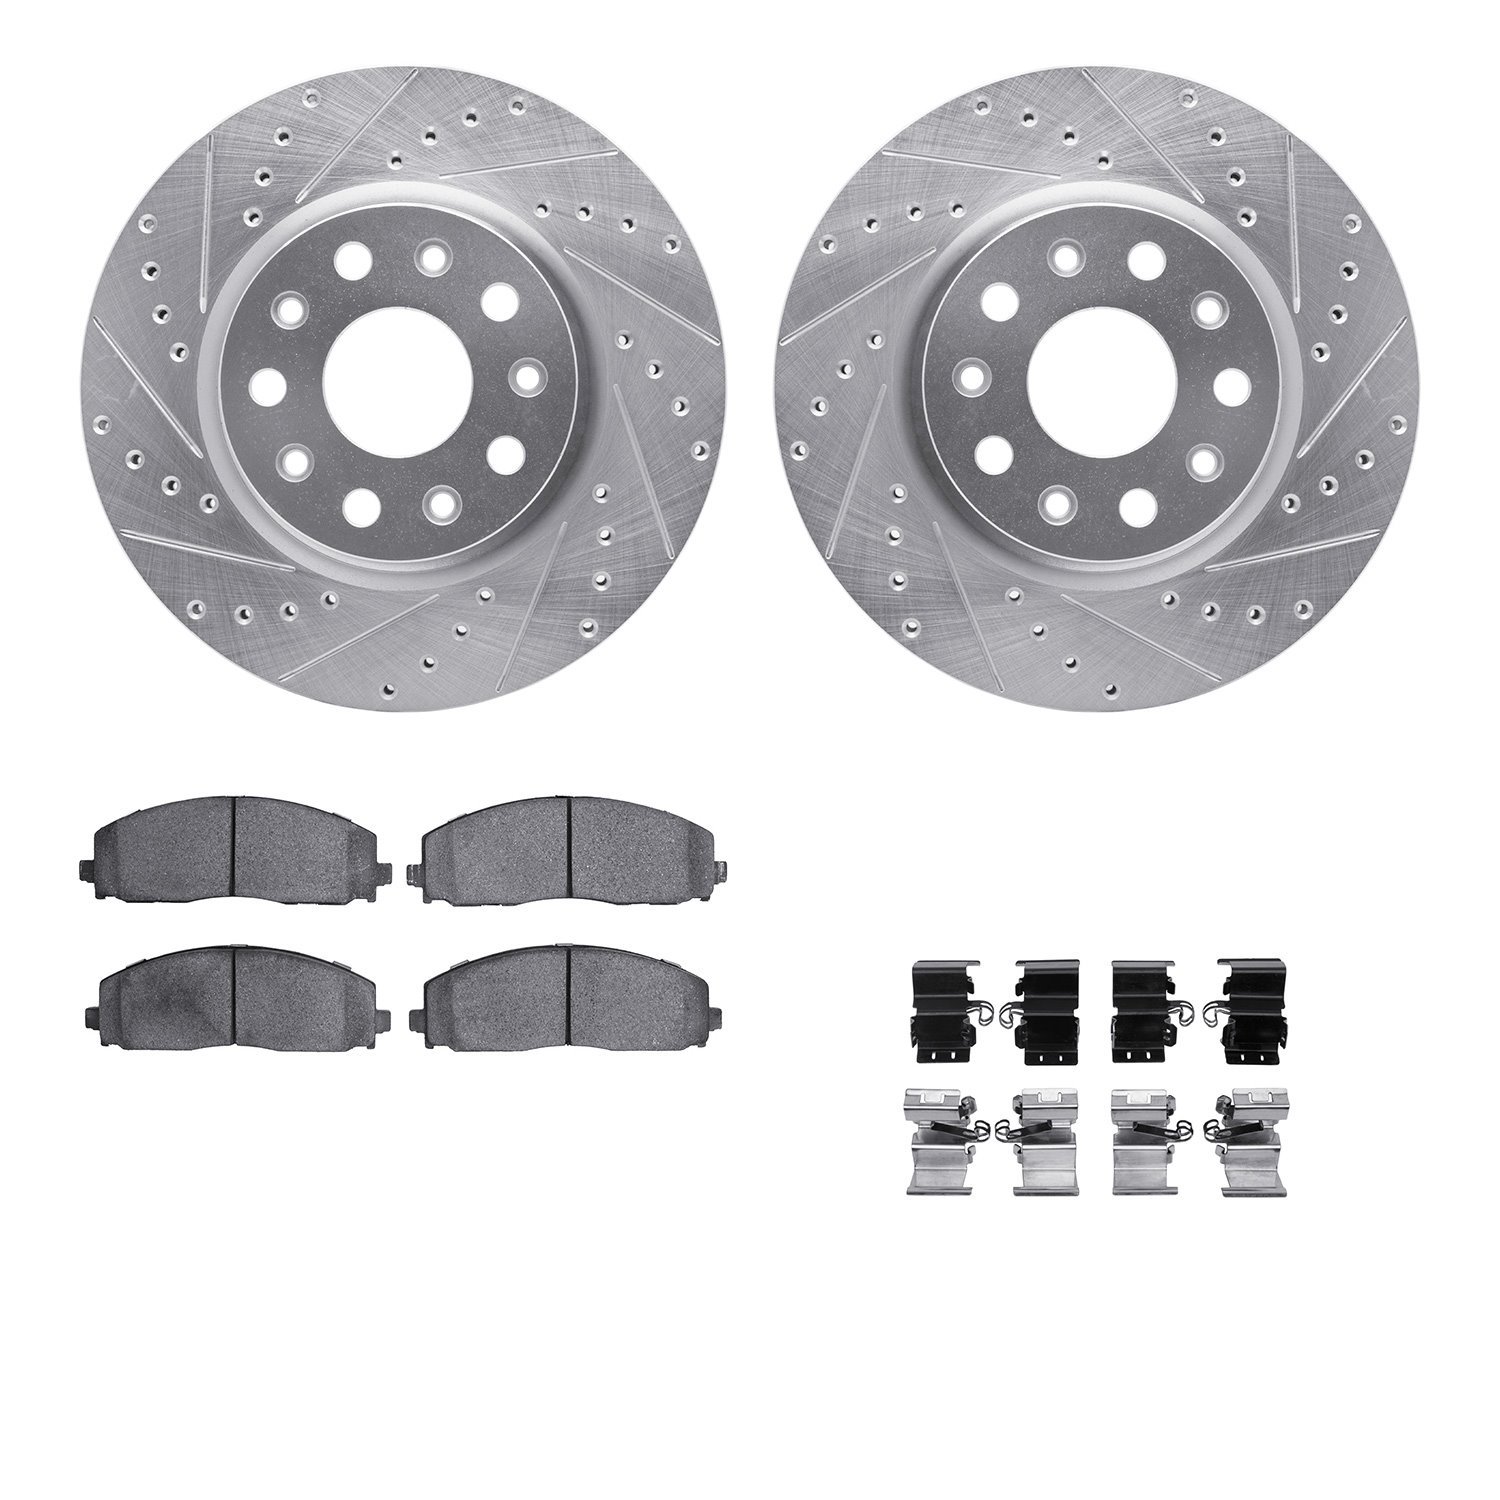 7412-42045 Drilled/Slotted Brake Rotors with Ultimate-Duty Brake Pads Kit & Hardware [Silver], Fits Select Mopar, Position: Fron